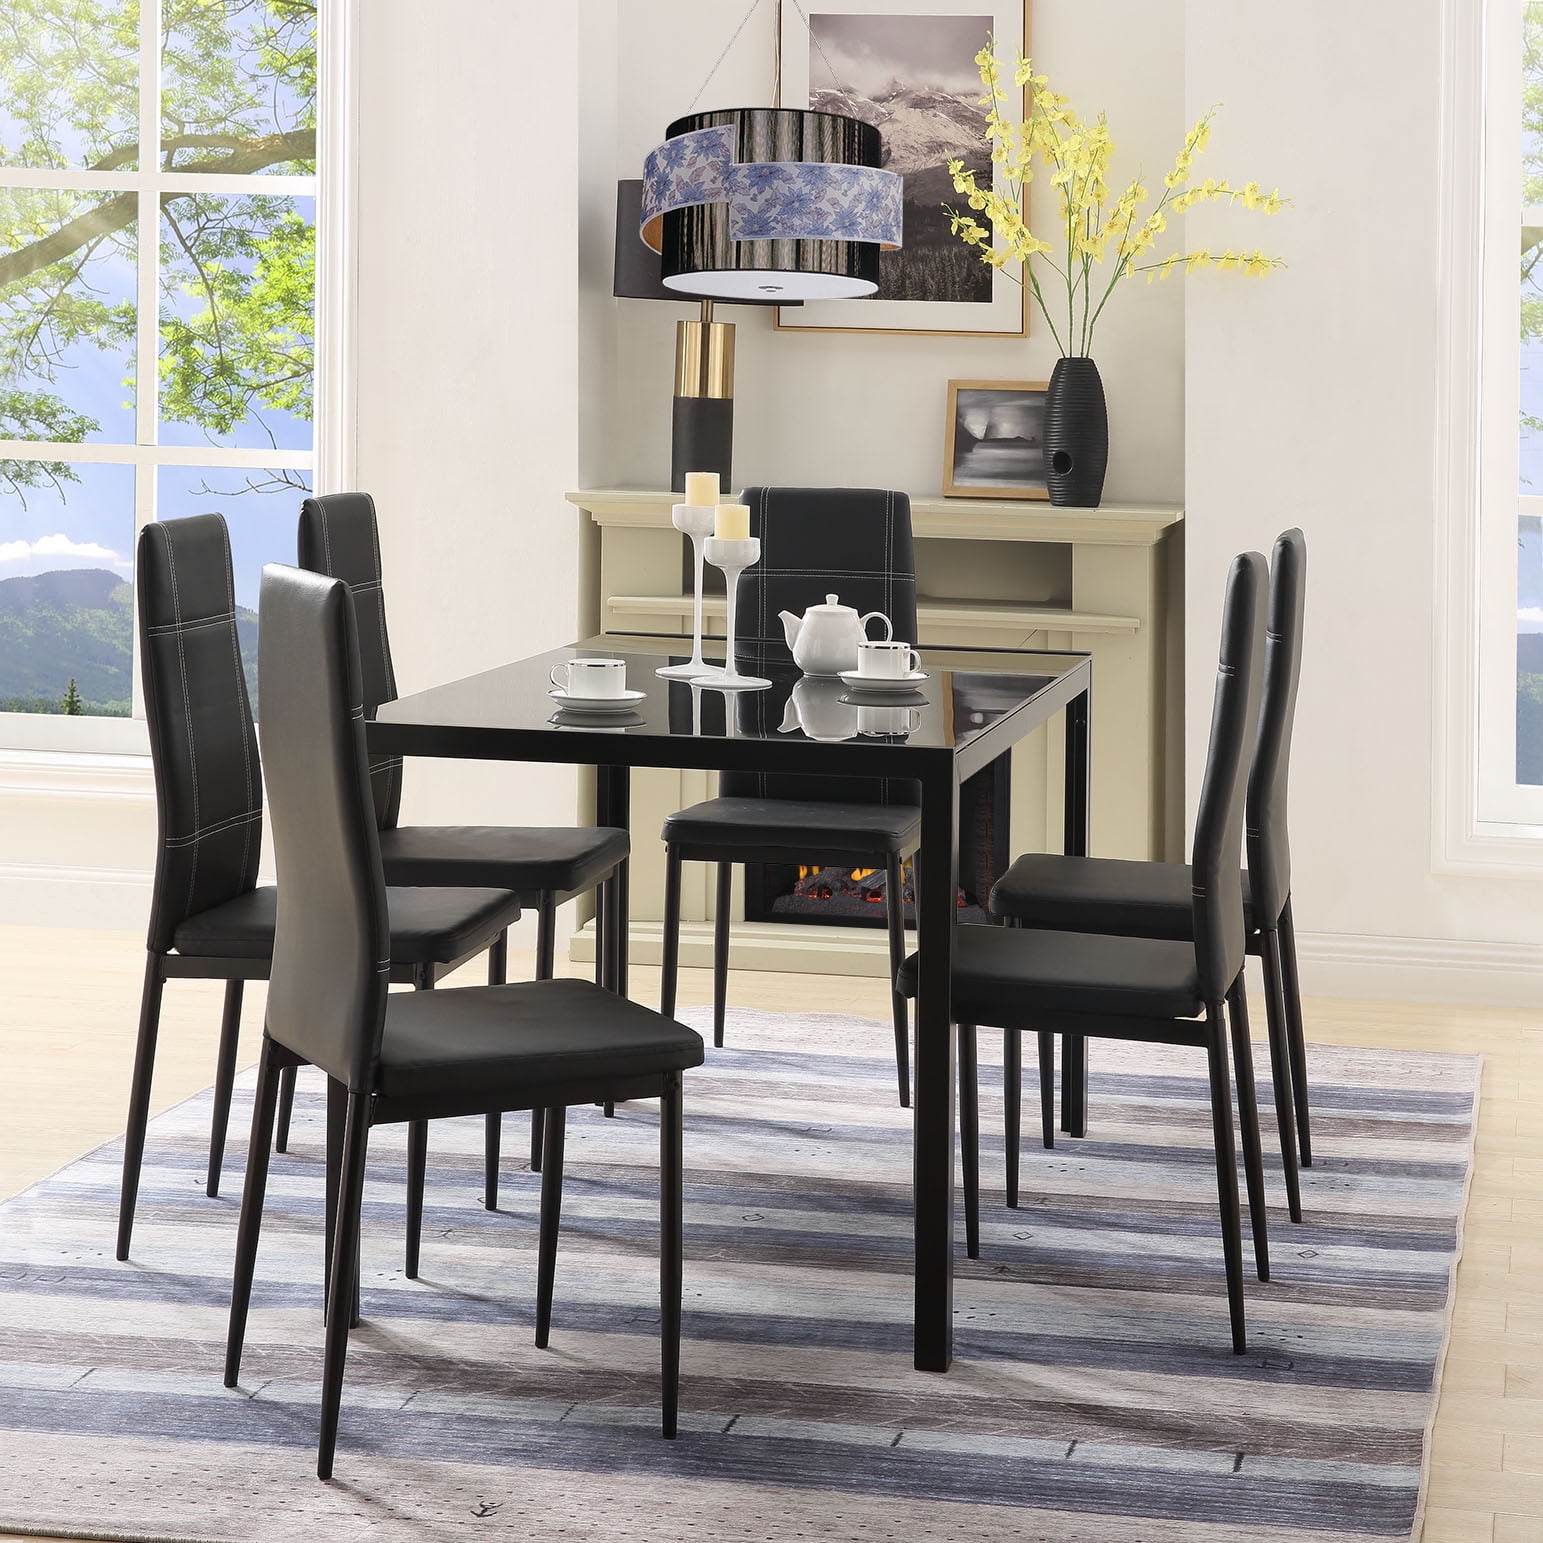 Dining Table with Chairs Set for 6, BTMWAY 7-Piece Modern Luxury ...